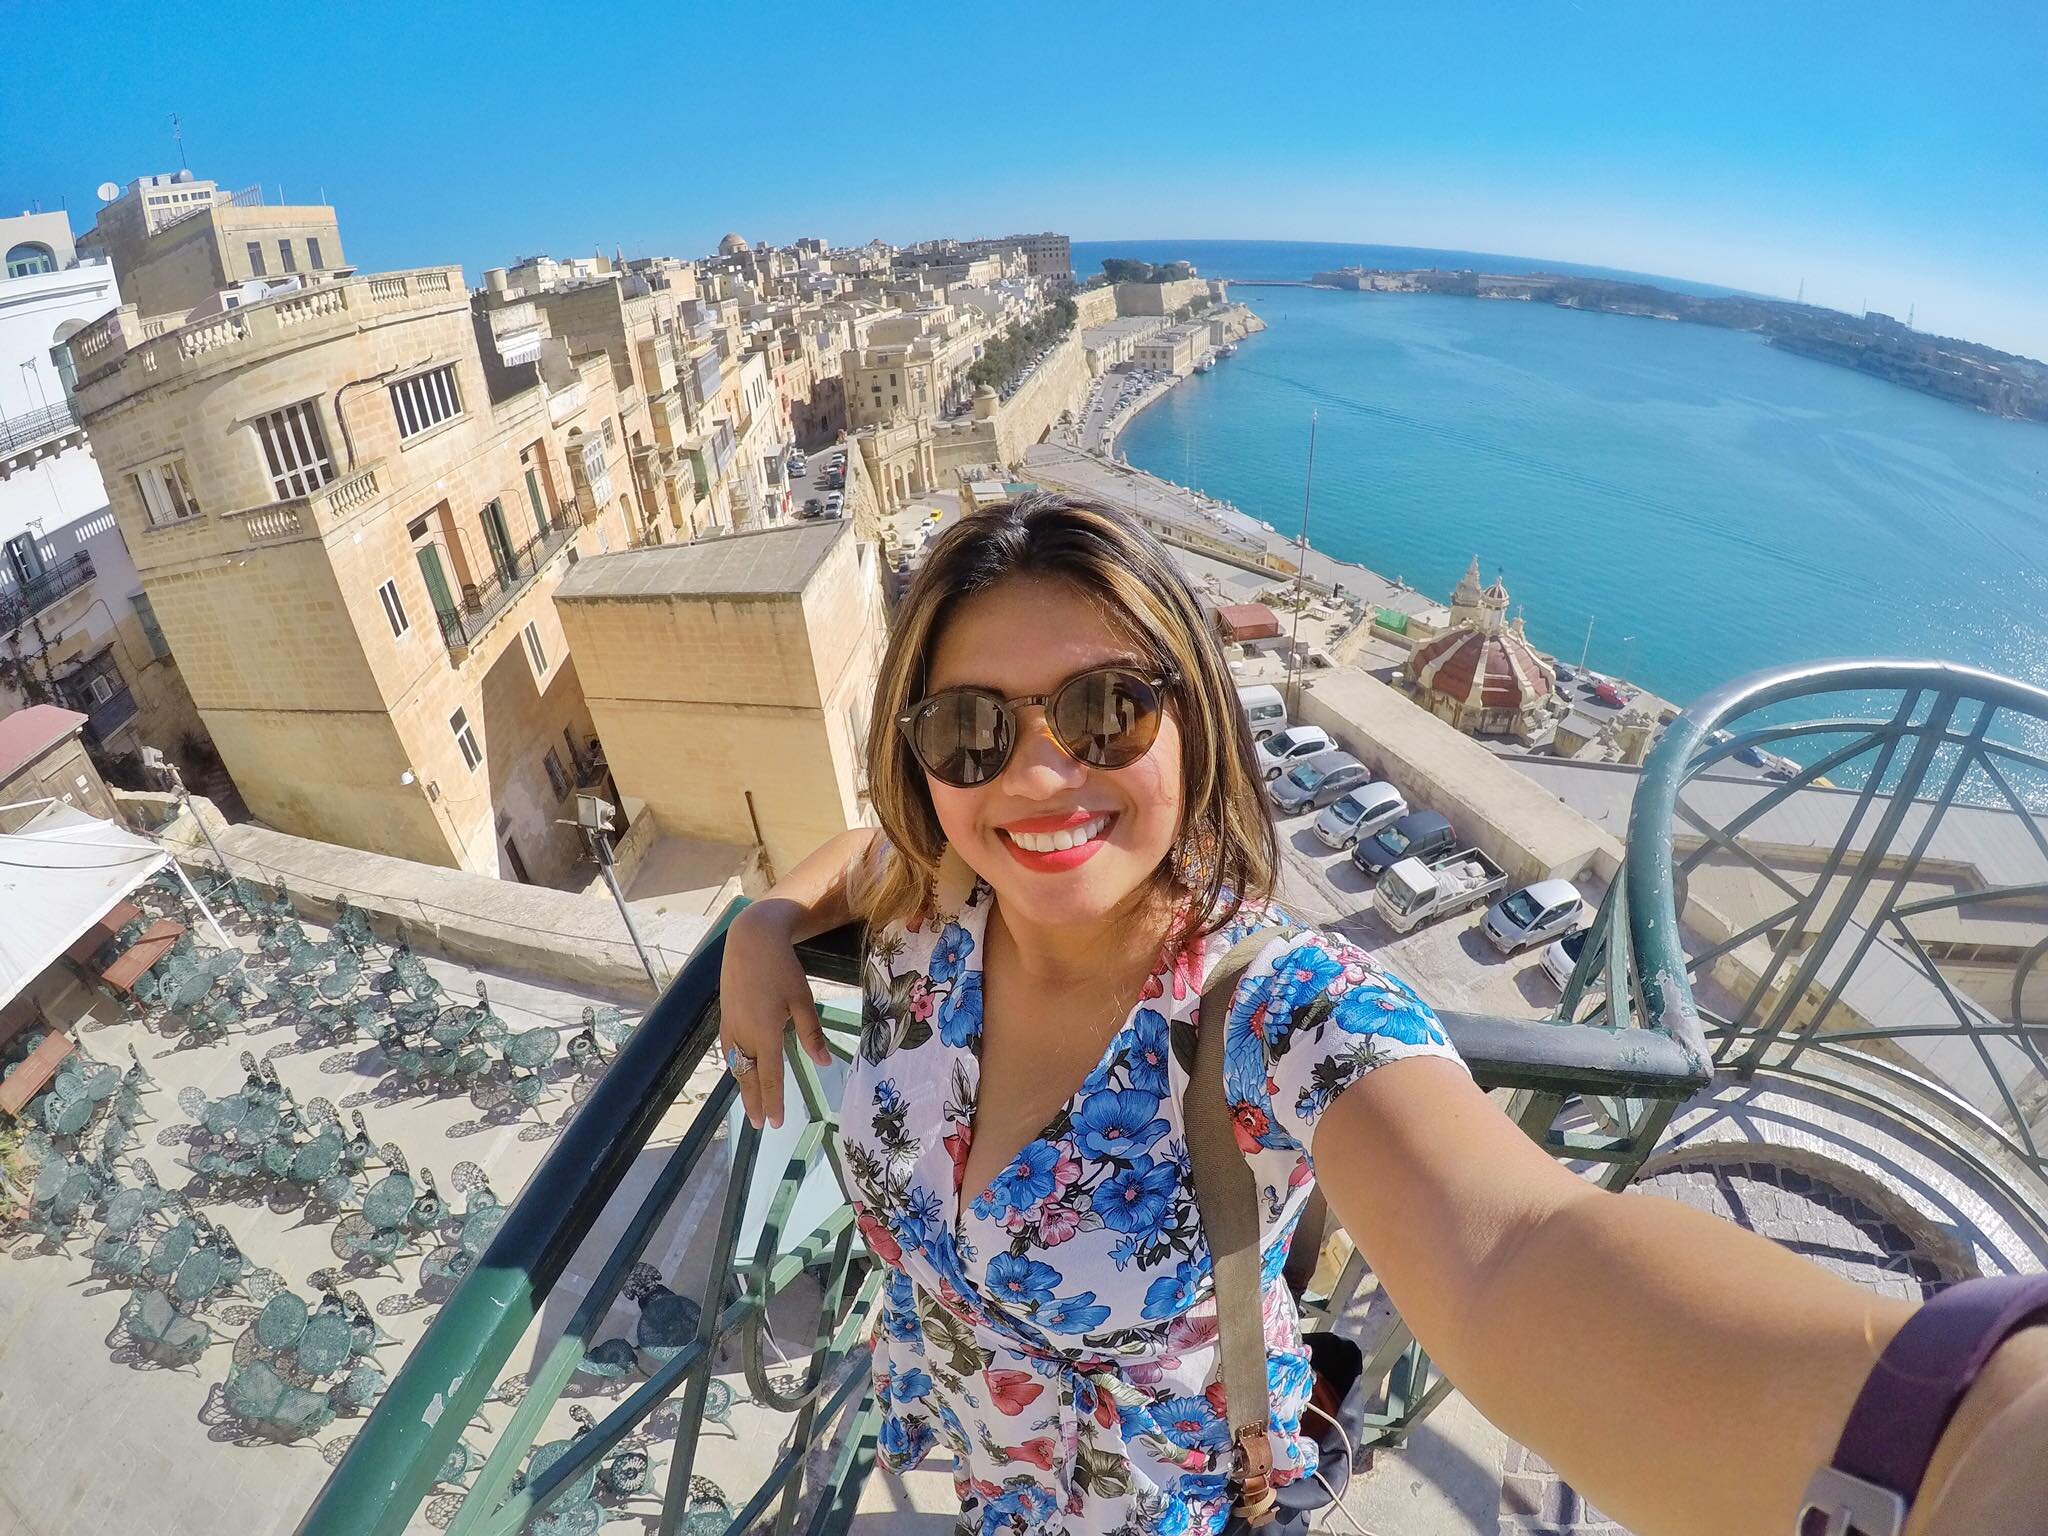 Malta Visa Overview - Visa Types, Requirements, Application & Guidelines